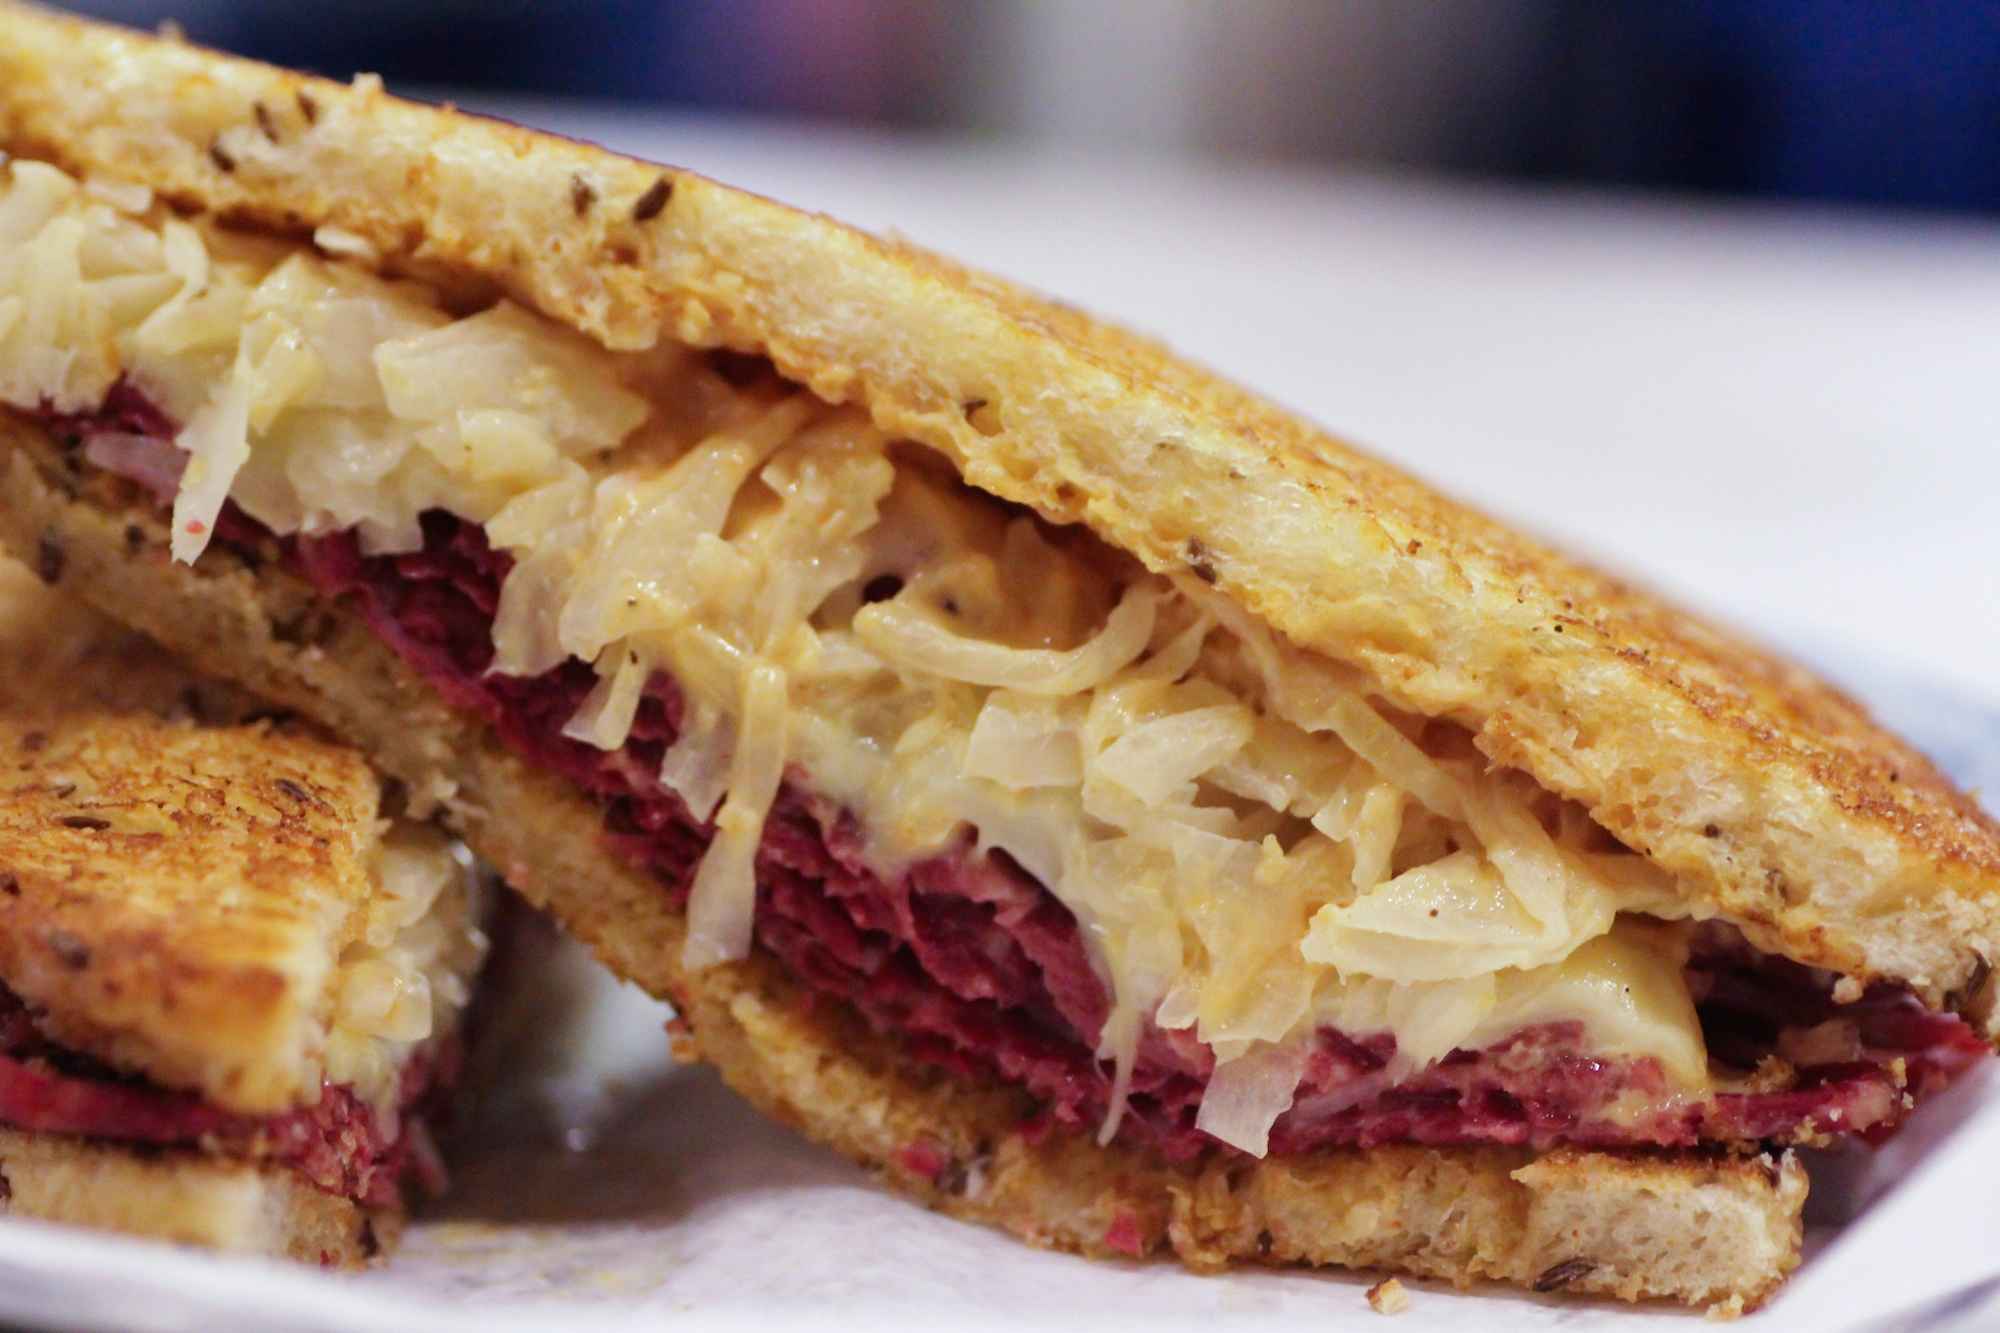 50 Sandwiches You Should Eat Before You Die | HuffPost